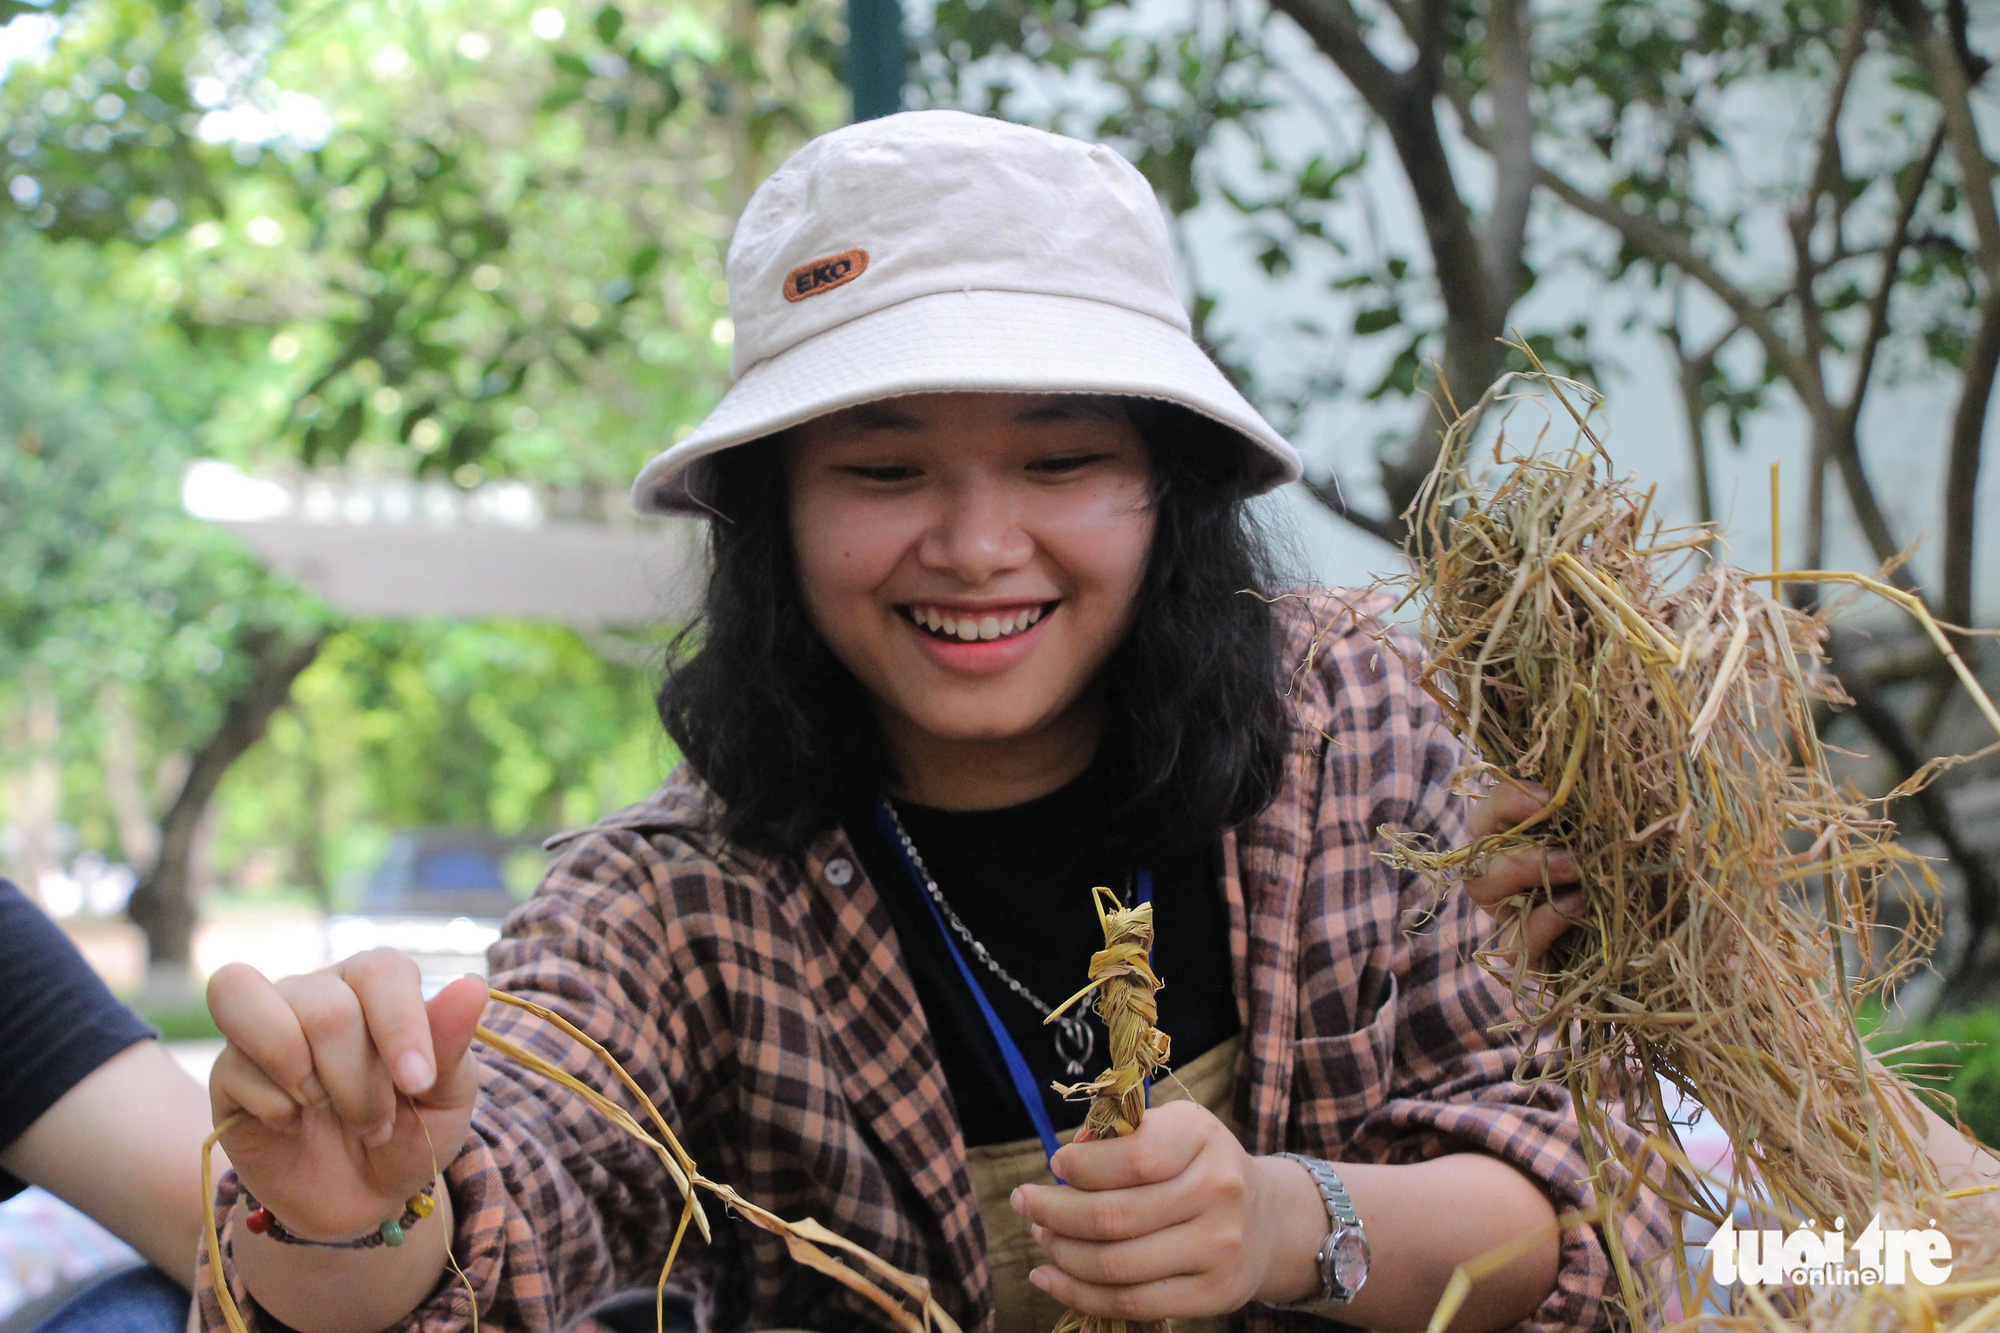 Nguyen Thuy Phuong, an undergraduate student, makes a straw man at the ‘Kingdom of Recycled Materials’ event in Hanoi, Vietnam, May 31, 2020. Photo: Ha Thanh / Tuoi Tre